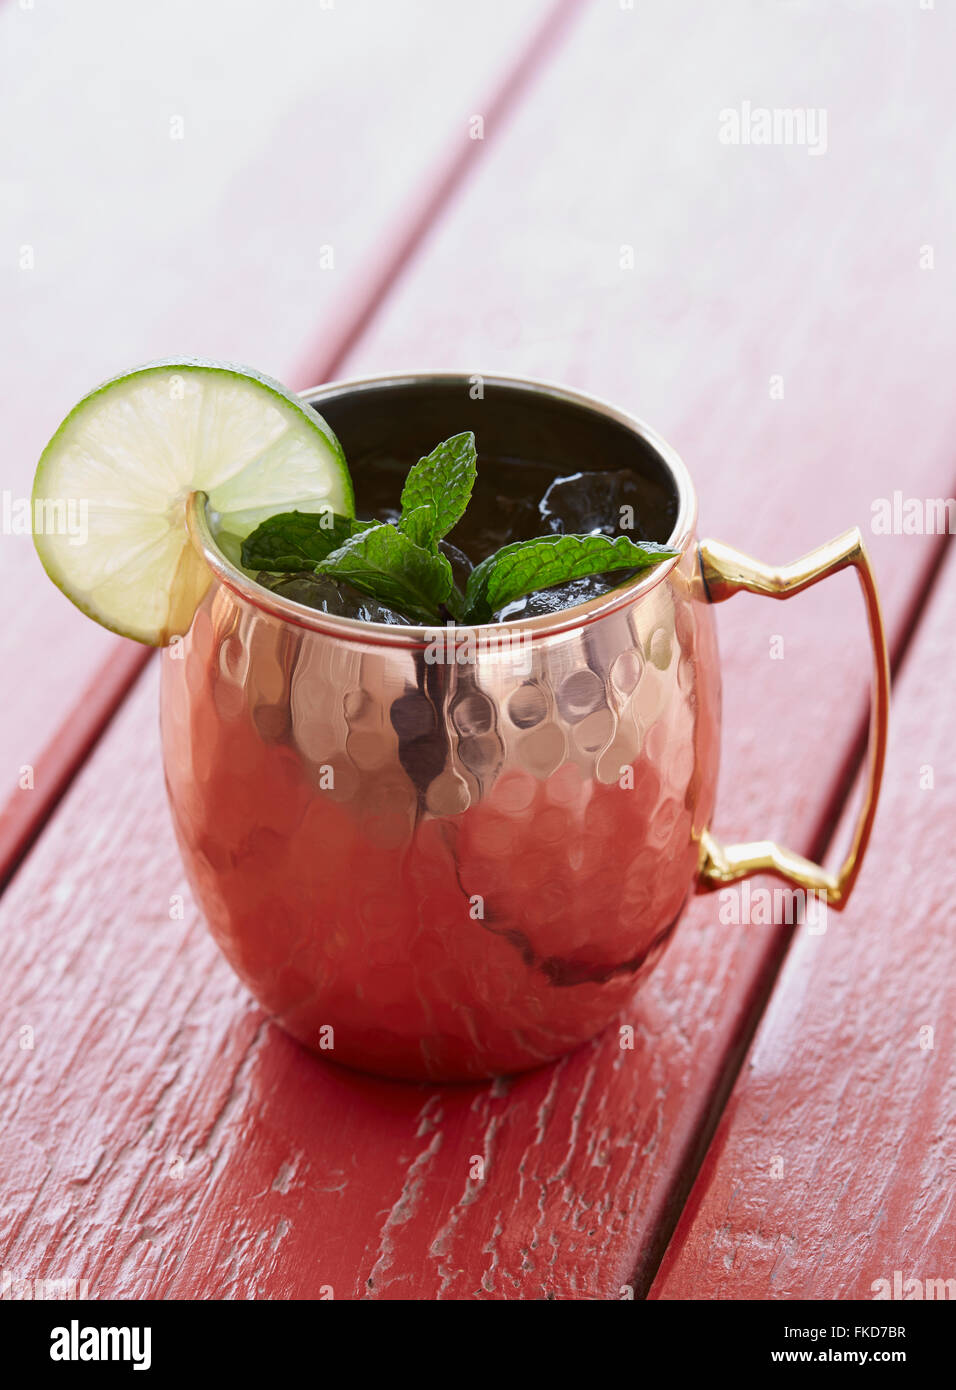 Moscow mule cocktail in argento mug Foto Stock